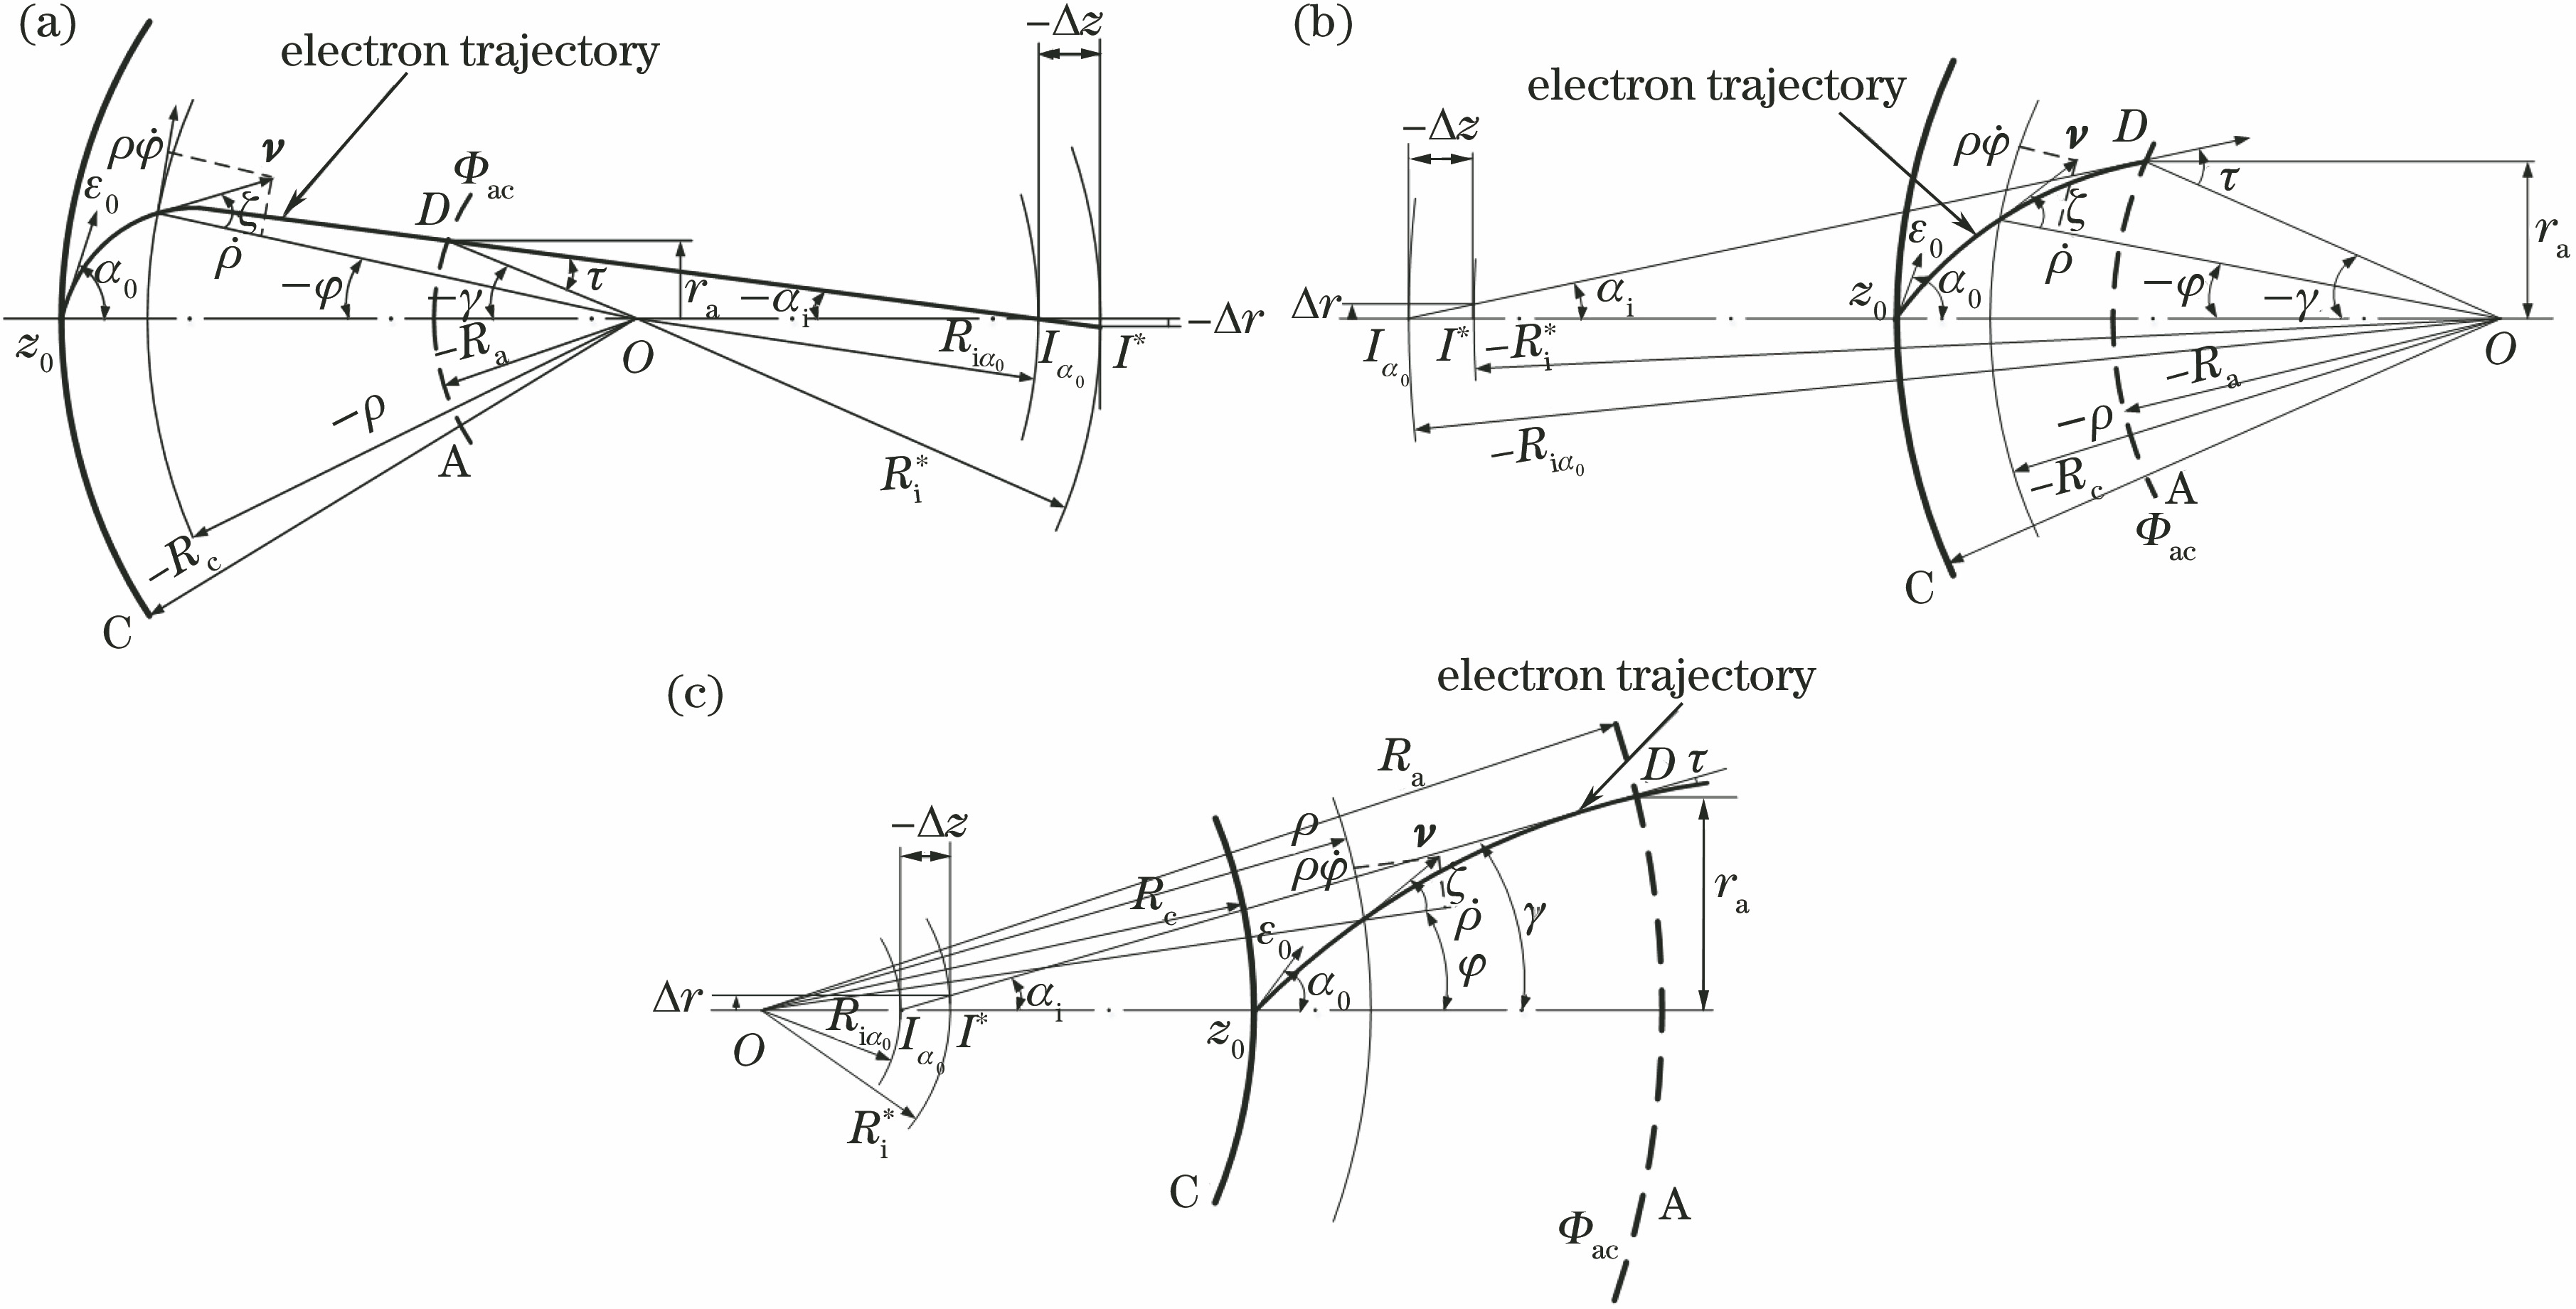 Electron trajectory in electrostatic focusing concentric spherical system composed of two electrodes. (a) n>2; (b) 1nn<1